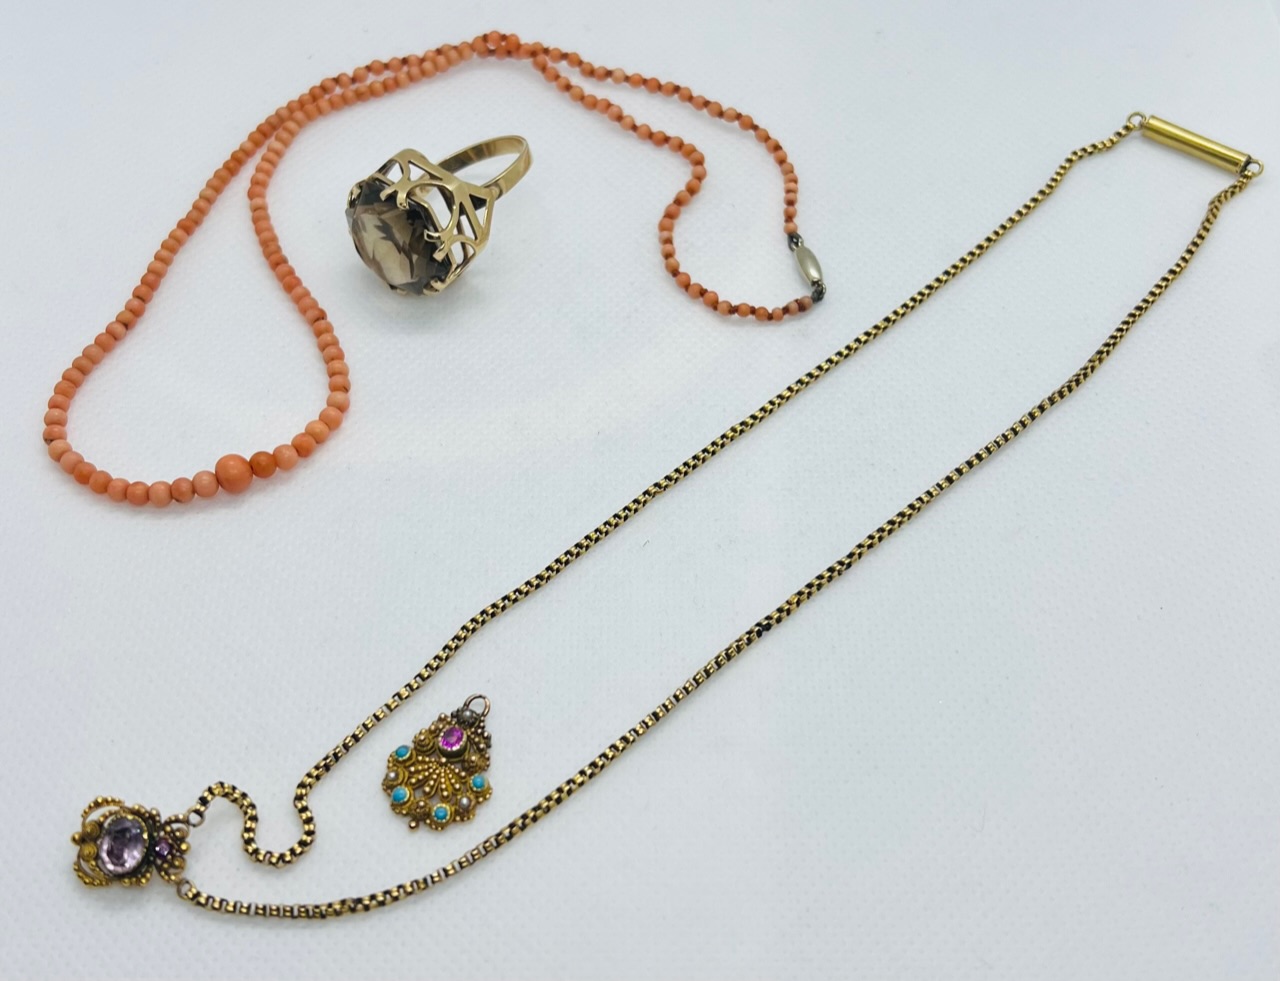 A collection of gem set jewellery. Featuring a yellow metal necklace, featuring bead and wire work